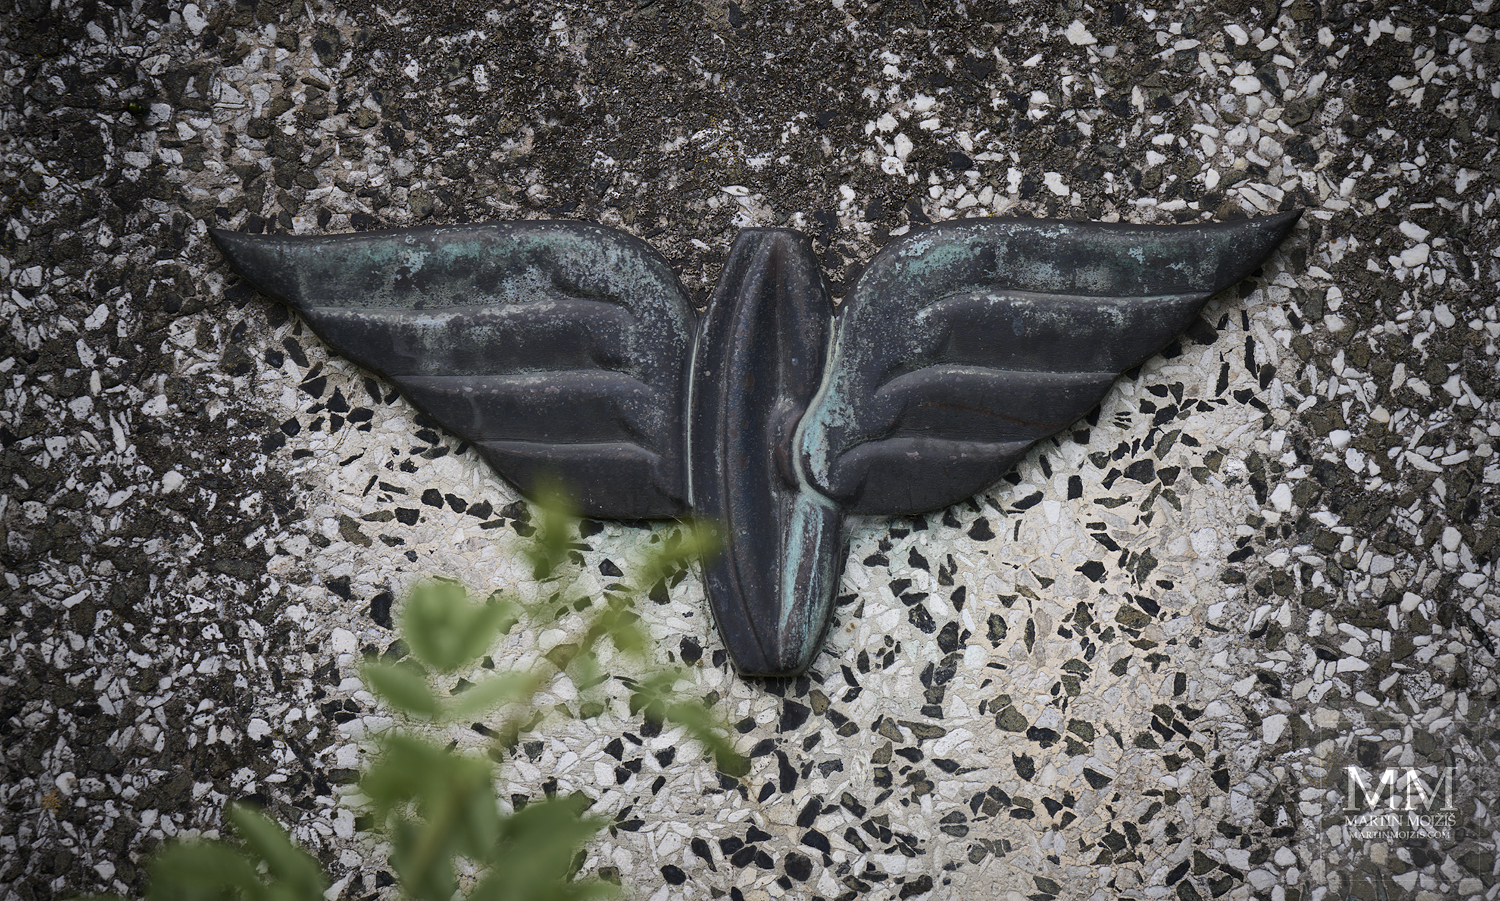 Metal sculpture of a winged railway wheel mounted on a stone. Fine art photograph THE WHEEL, THAT FLIES, photographed by Martin Mojzis.